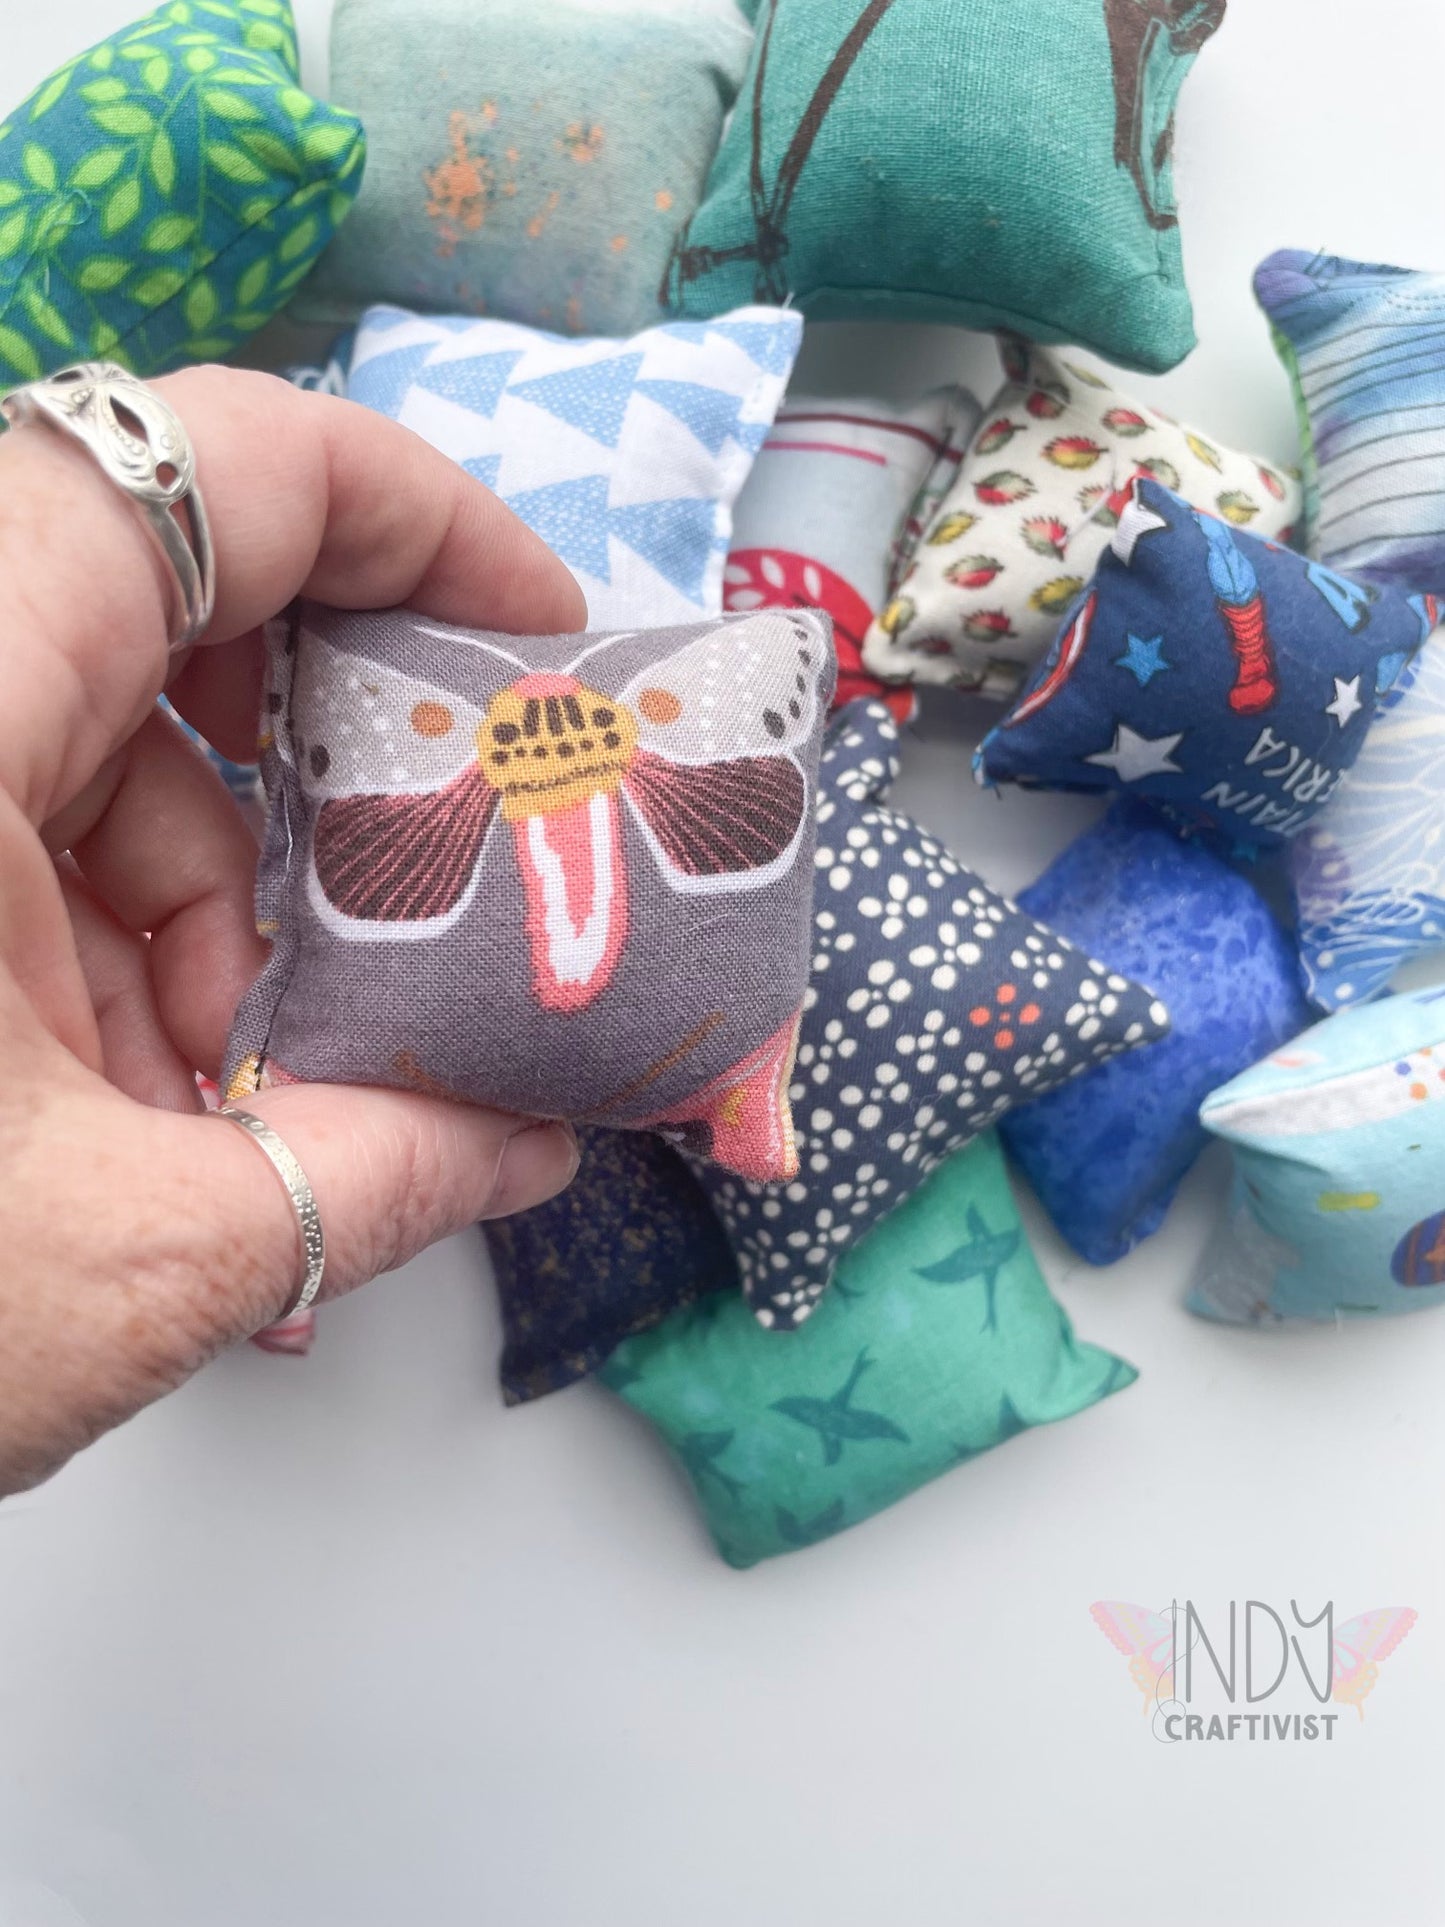 Handmade From Scraps Catnip Toys for Cats